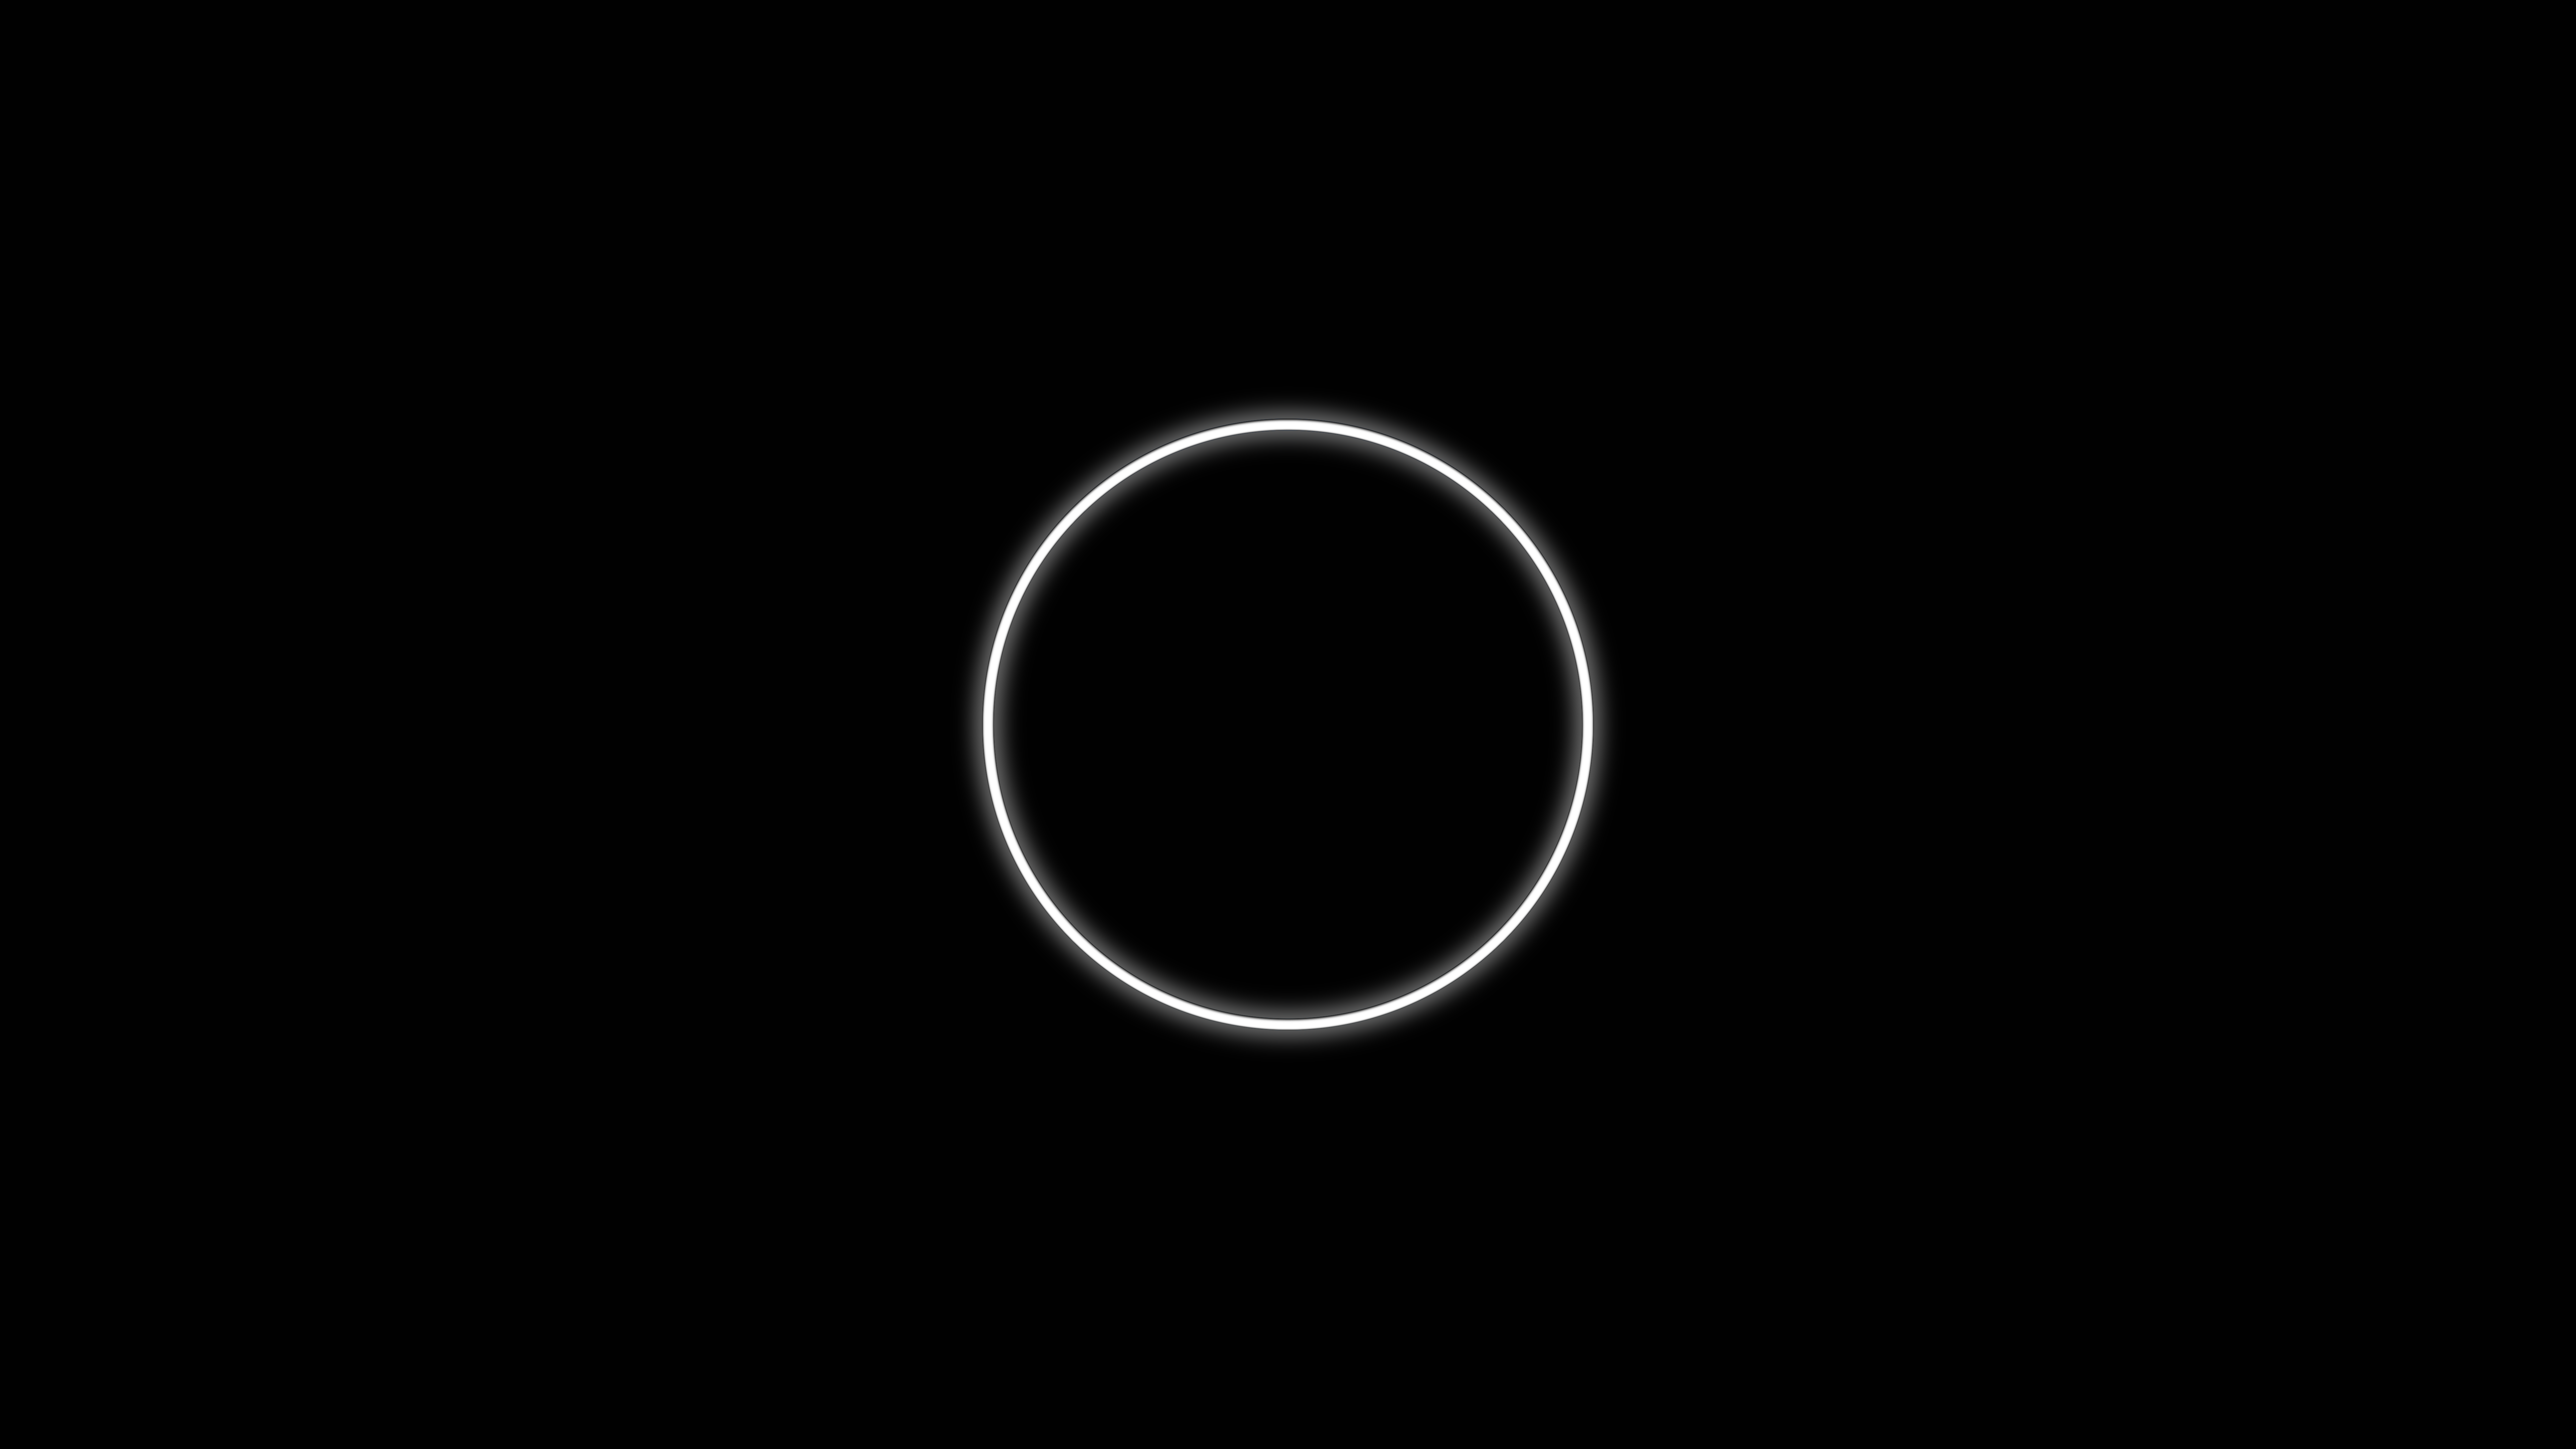 General 7680x4320 black white circle abstract calm Void black background simple background minimalism Meto monochrome geometry shapes